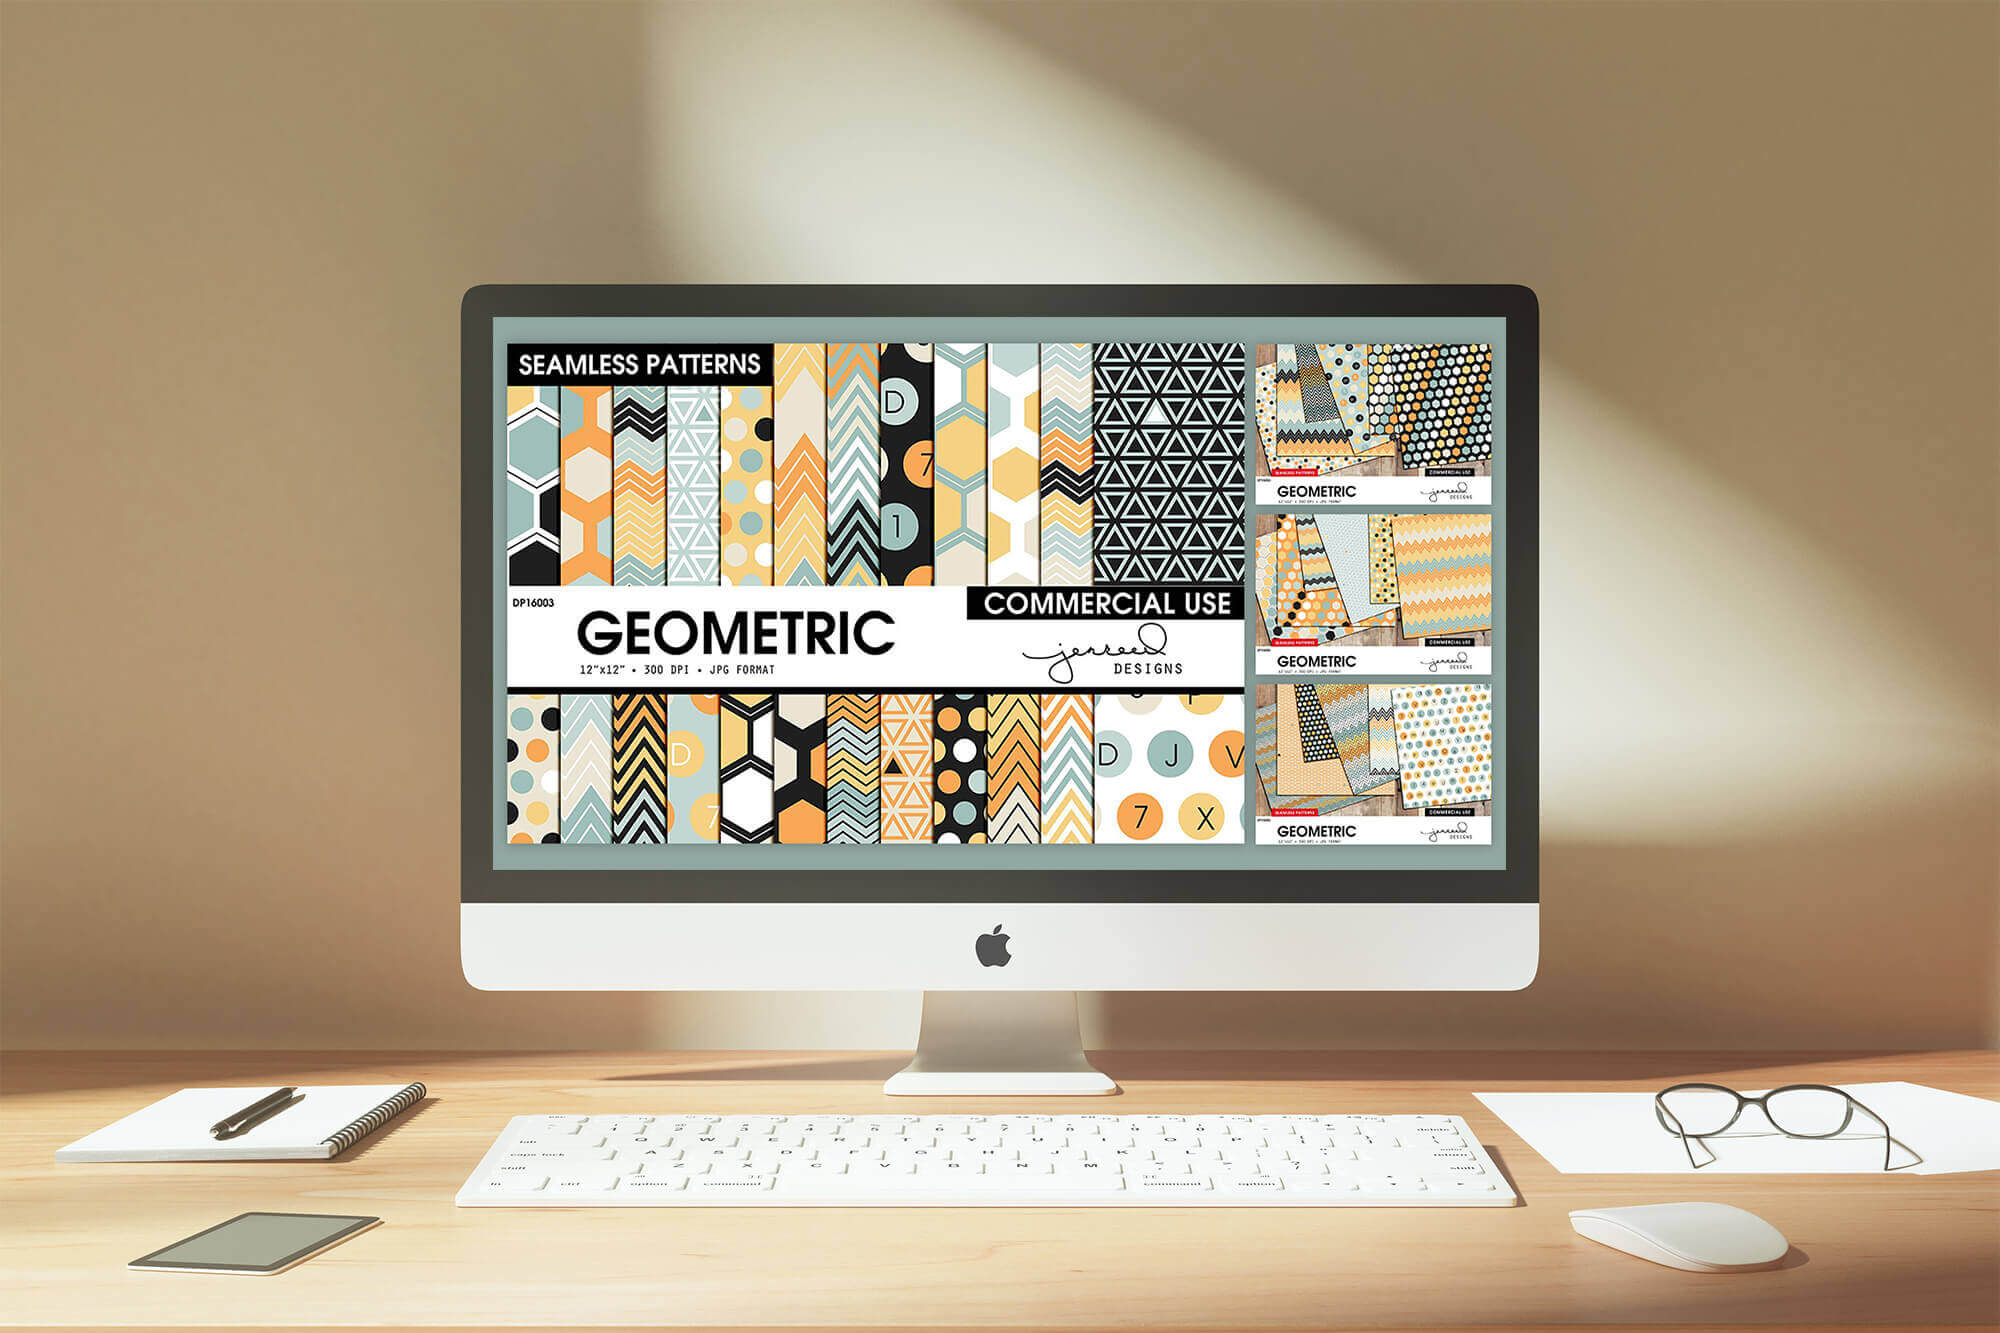 Preview Geometric Seamless Patterns on Computer.